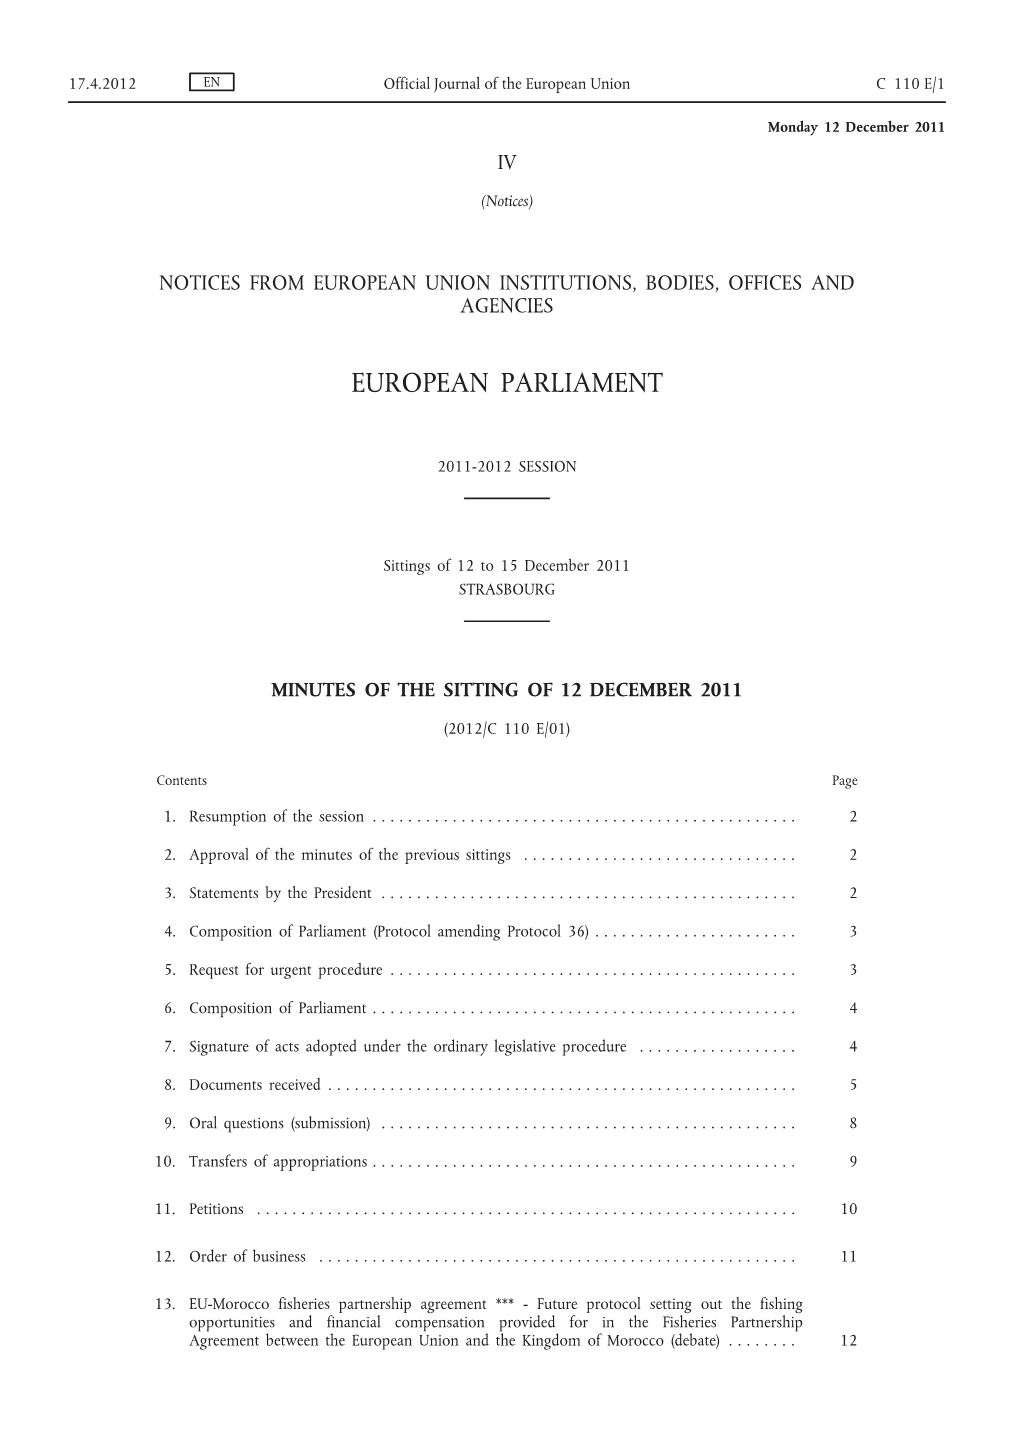 Minutes of the Sitting of 12 December 2011